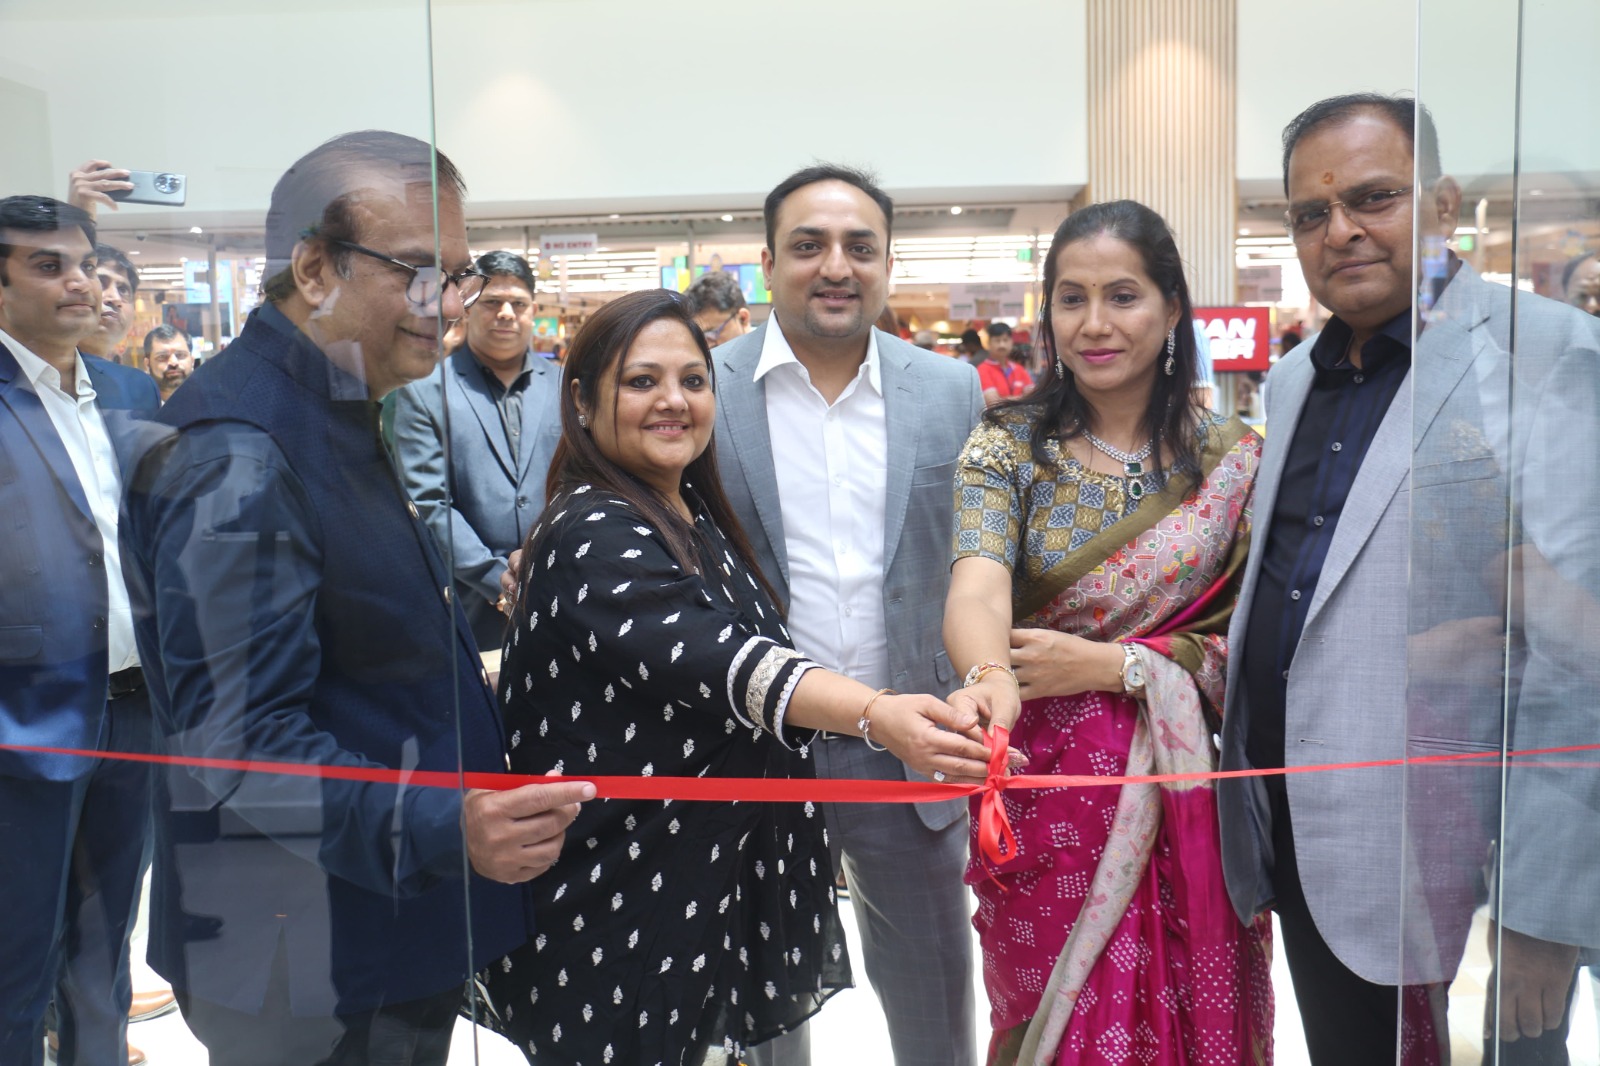 Grand launch of Limelight Diamonds store in the city of Nawabs